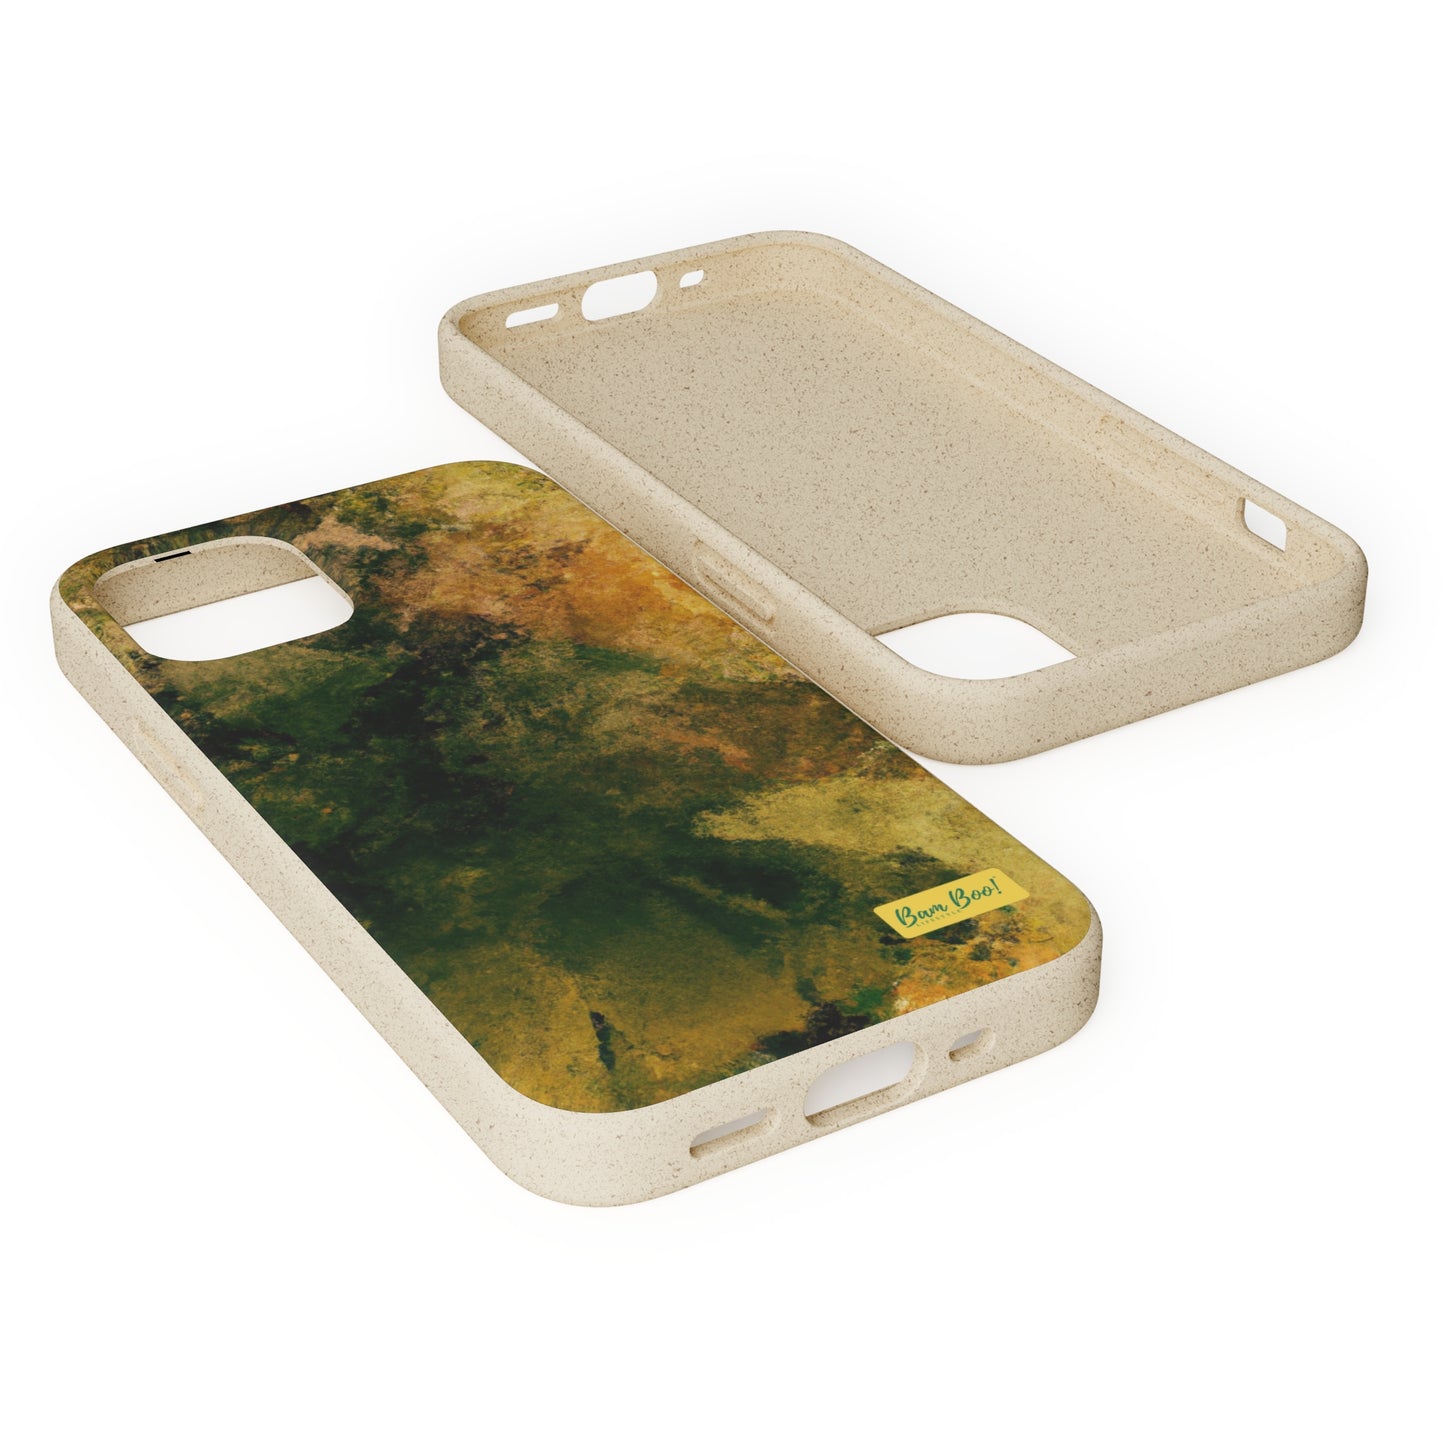 “Nature in Harmony: A Harmonic Abstract Artpiece.” - Bam Boo! Lifestyle Eco-friendly Cases